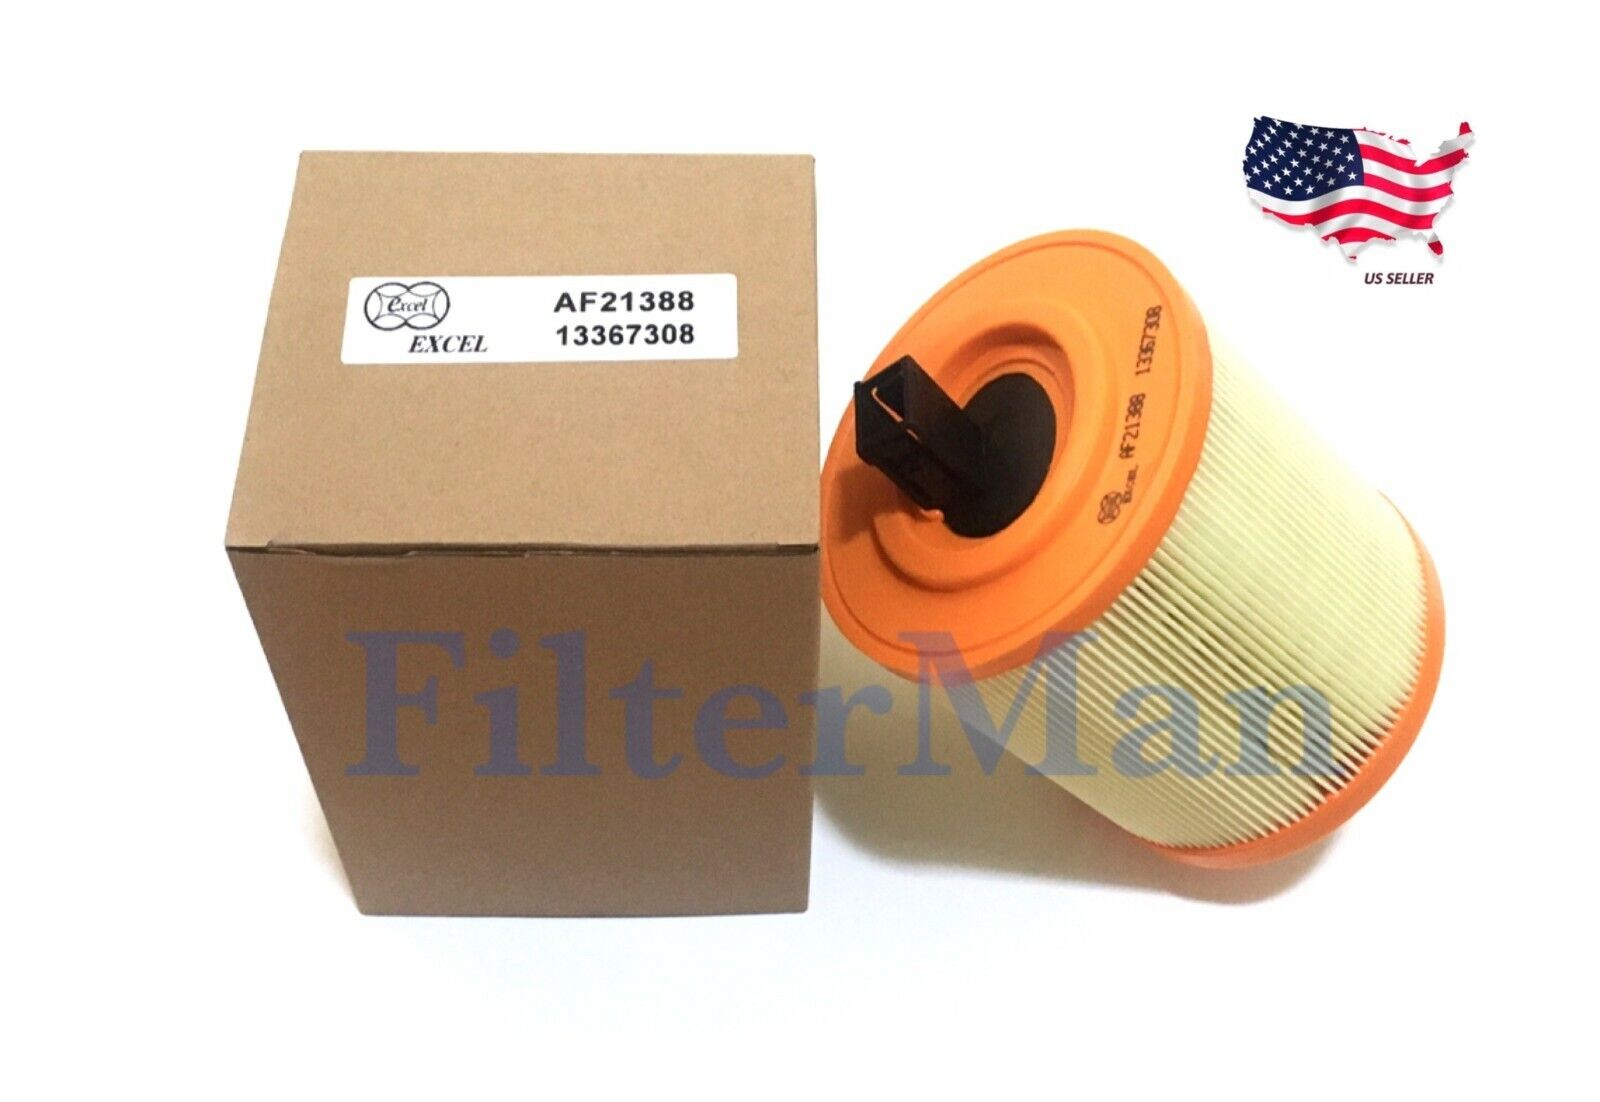 Engine Air Filter for 2016-2019 Chevy Cruze 1.4L & Cadillac ATS V6 Twin-Turbo